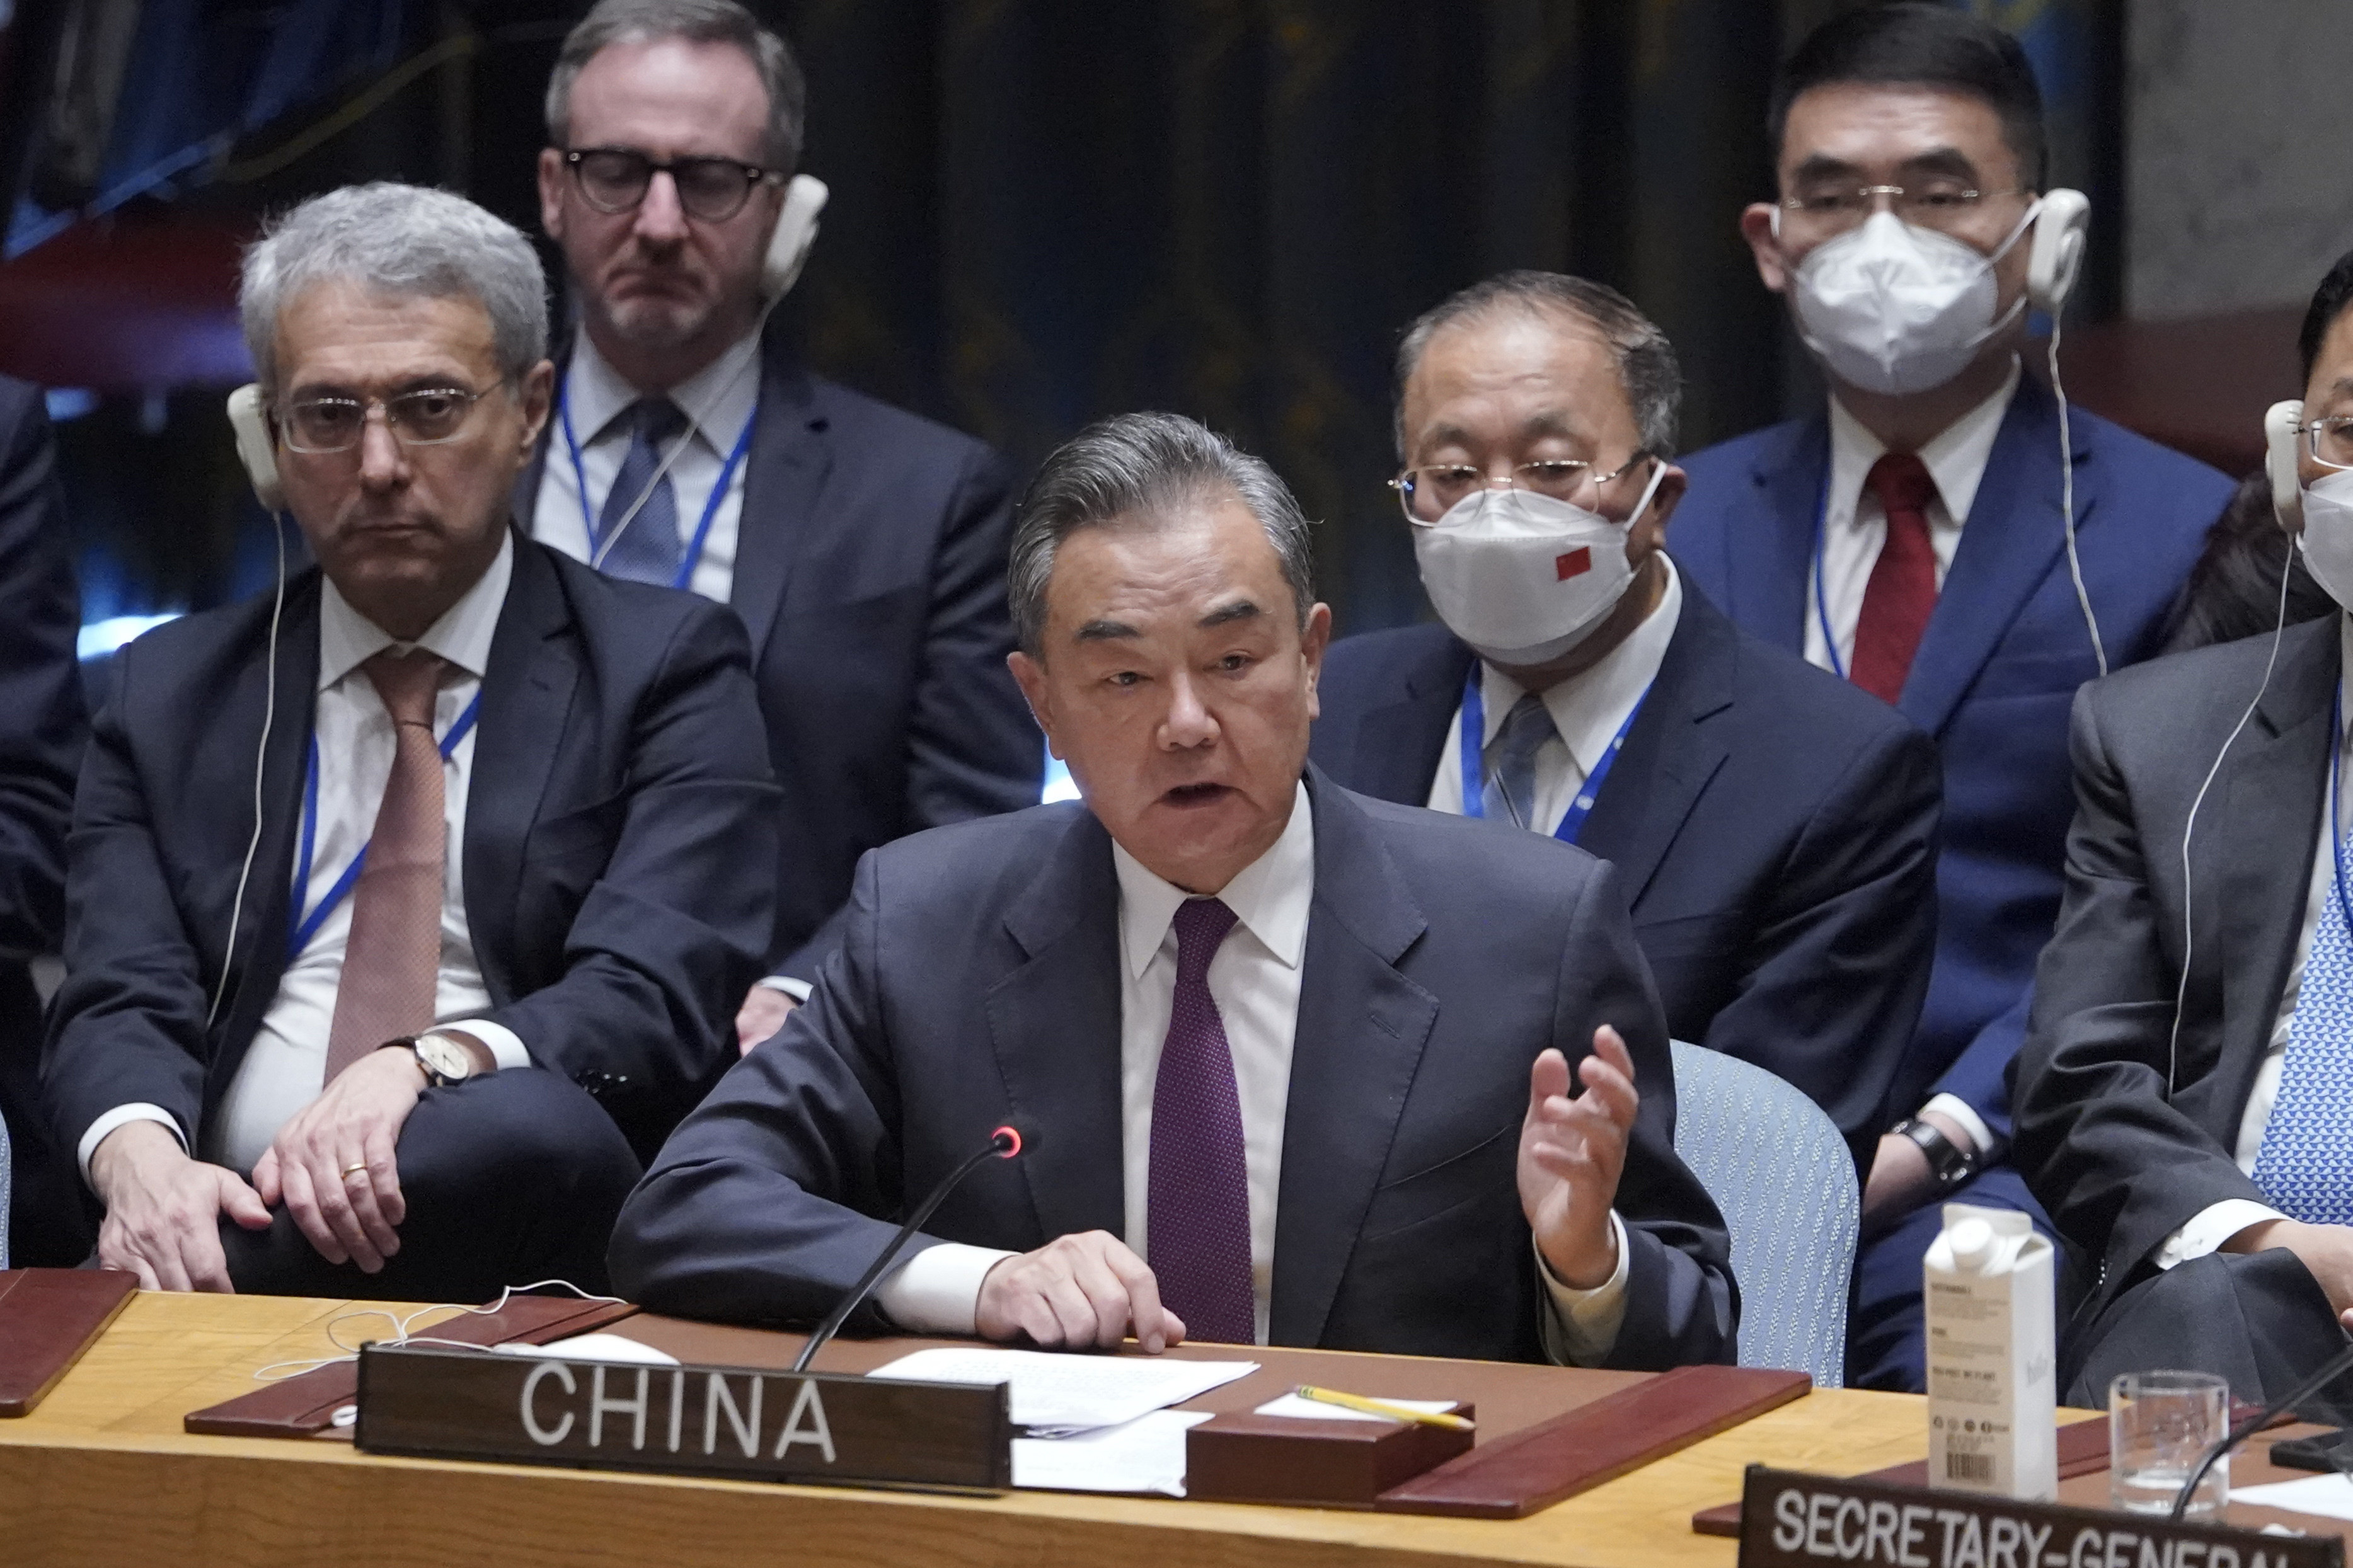 China’s top diplomat Wang Yi speaks during a Security Council meeting last September 22 at the UN headquarters. At the latest meeting earlier this month, Wang called for developing countries to be given a greater say in the council. Photo: AP